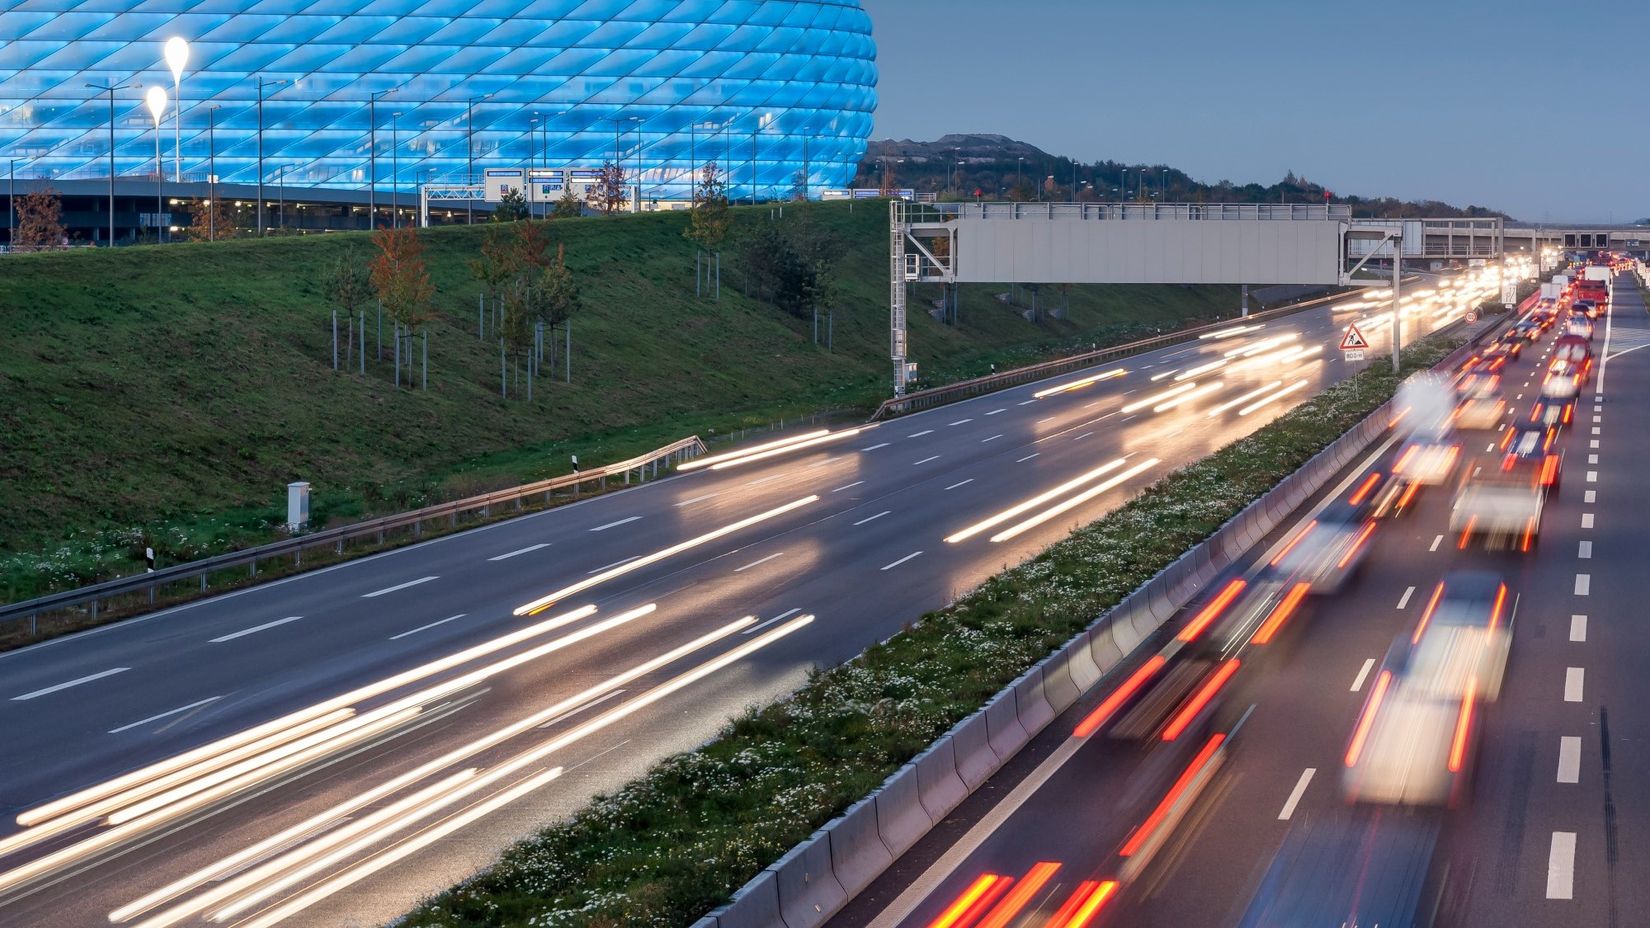 Mobileye will test its autonomous vehicles on German roadways, like this Autobahn through Munich, where TÜV SÜD is based.